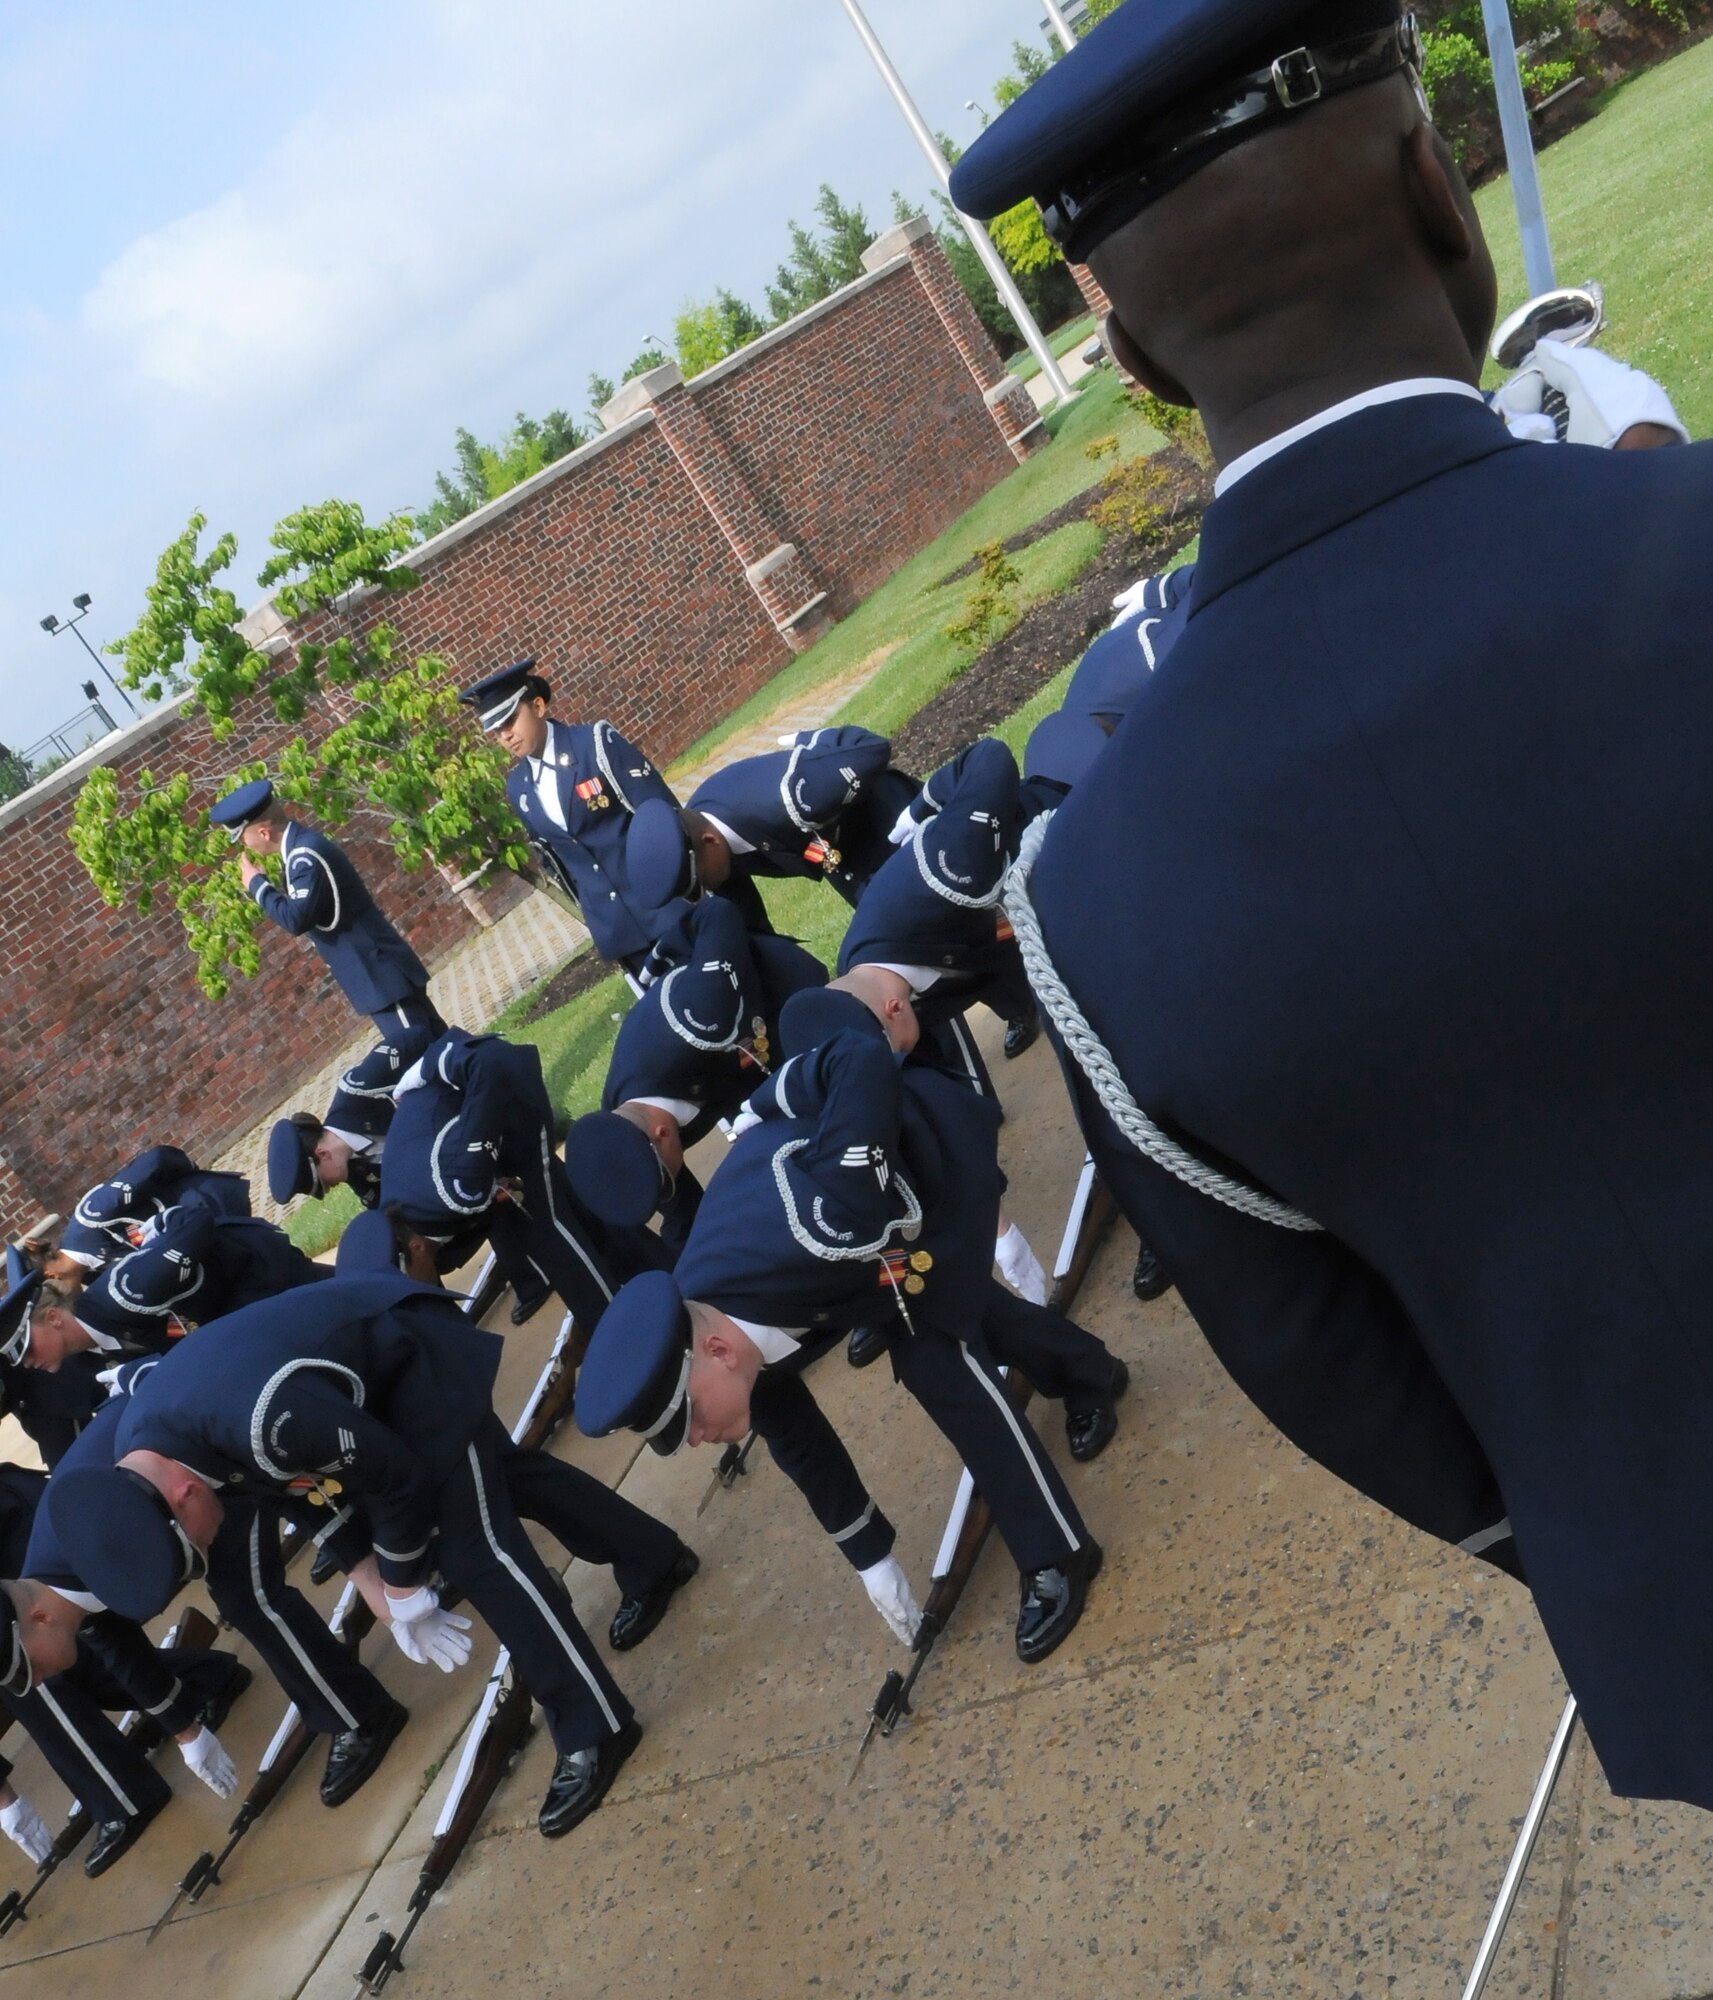 The U.S. Air Force Honor Guard prepares their formation prior to the retirement of Command Chief Master Sgt. Richard A. Smith, Air National Guard command chief master sergeant, May 29 on the Bolling ceremonial lawn. Chief Smith served as the ninth command chief master sergeant for the Air National Guard after being selected by Lt. Gen. Daniel James III in July 2004. (U.S Air Force photo by Senior Airman Alexandre Montes)